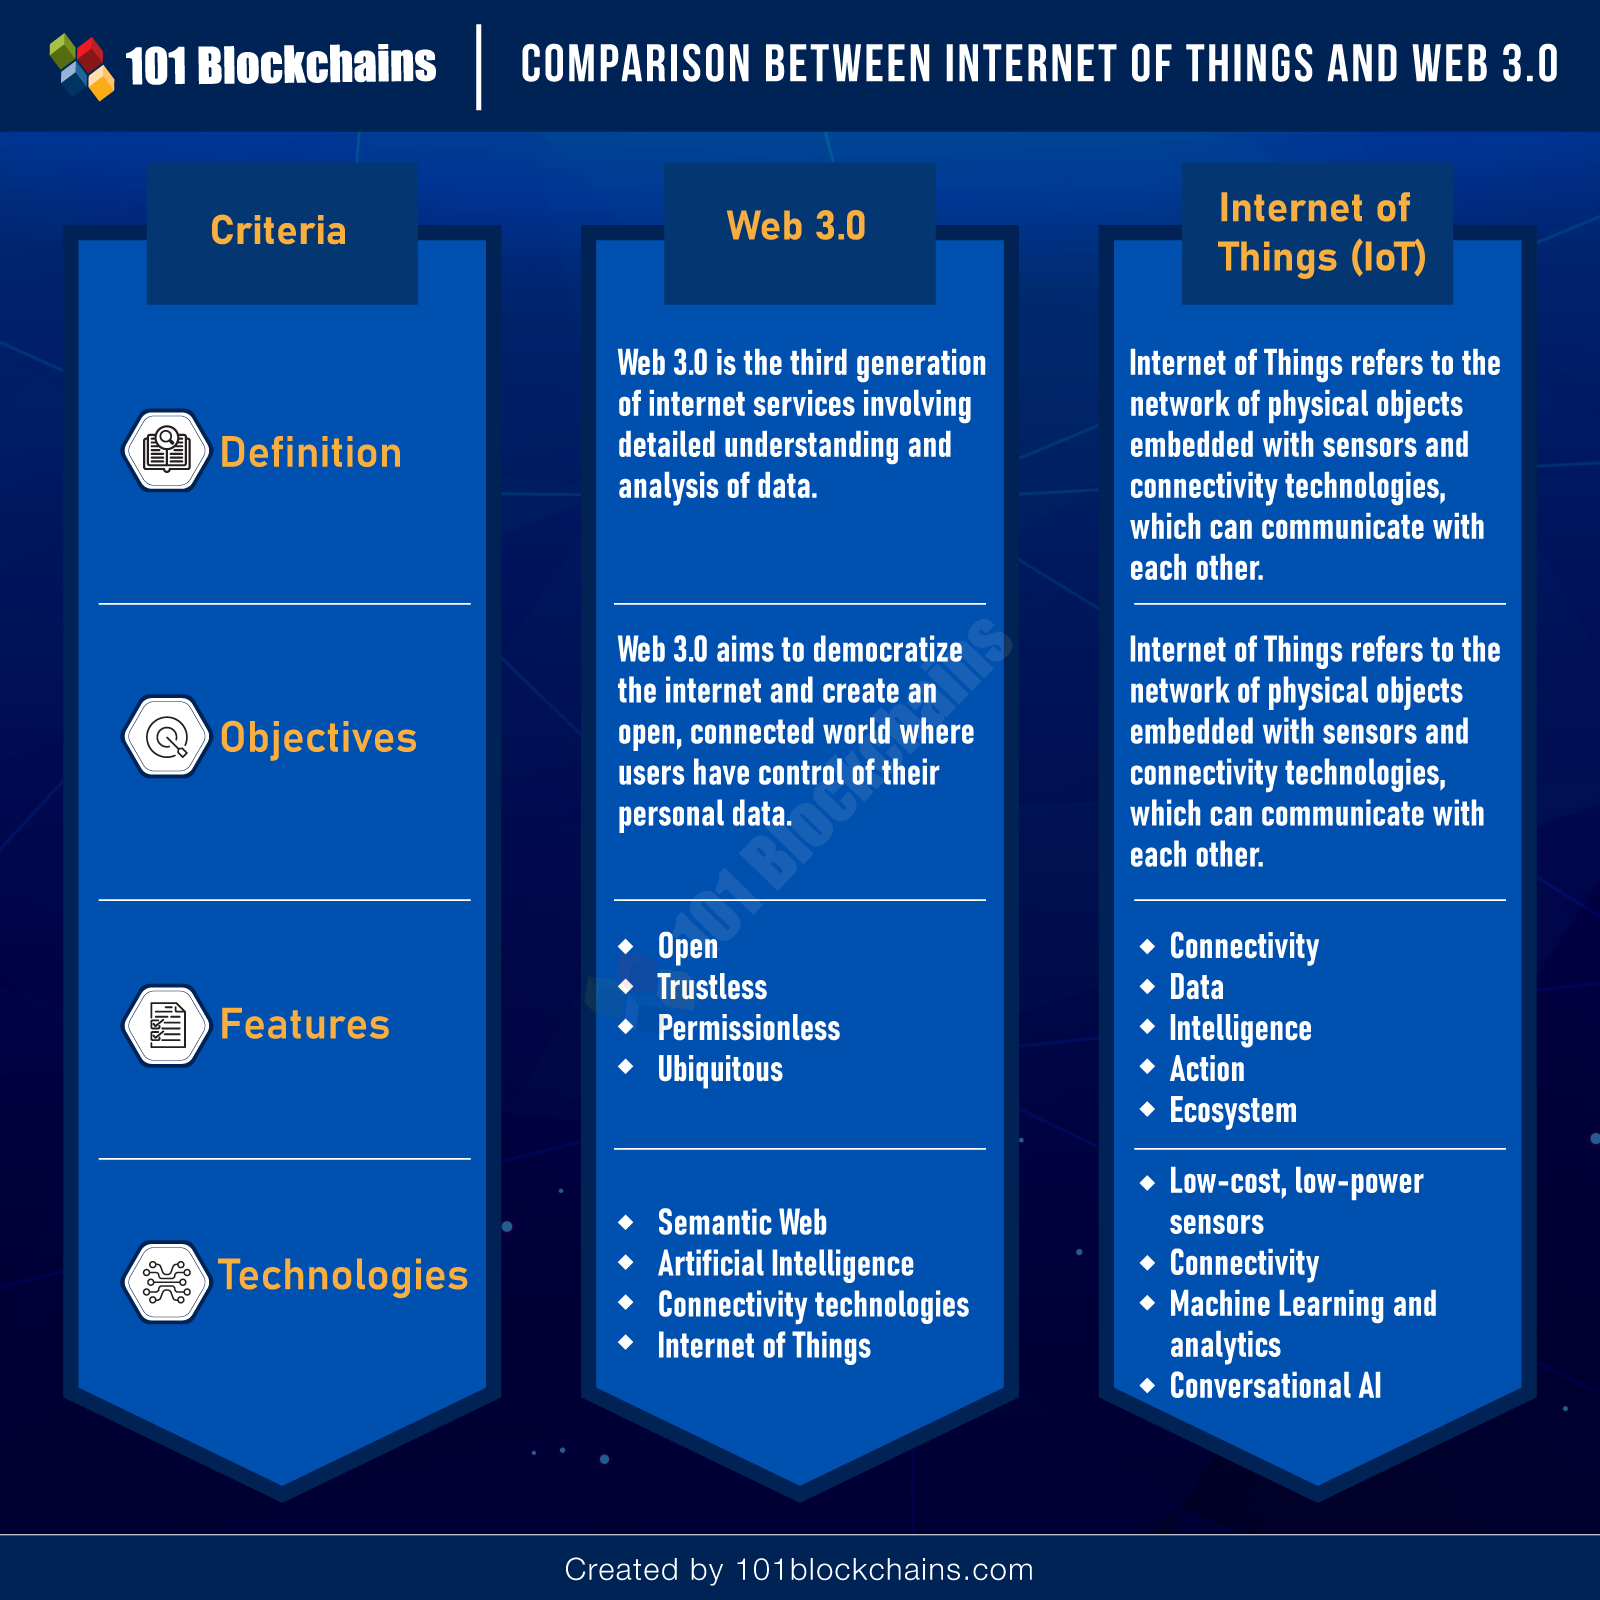 Comparison between Internet of Things and web 3.0